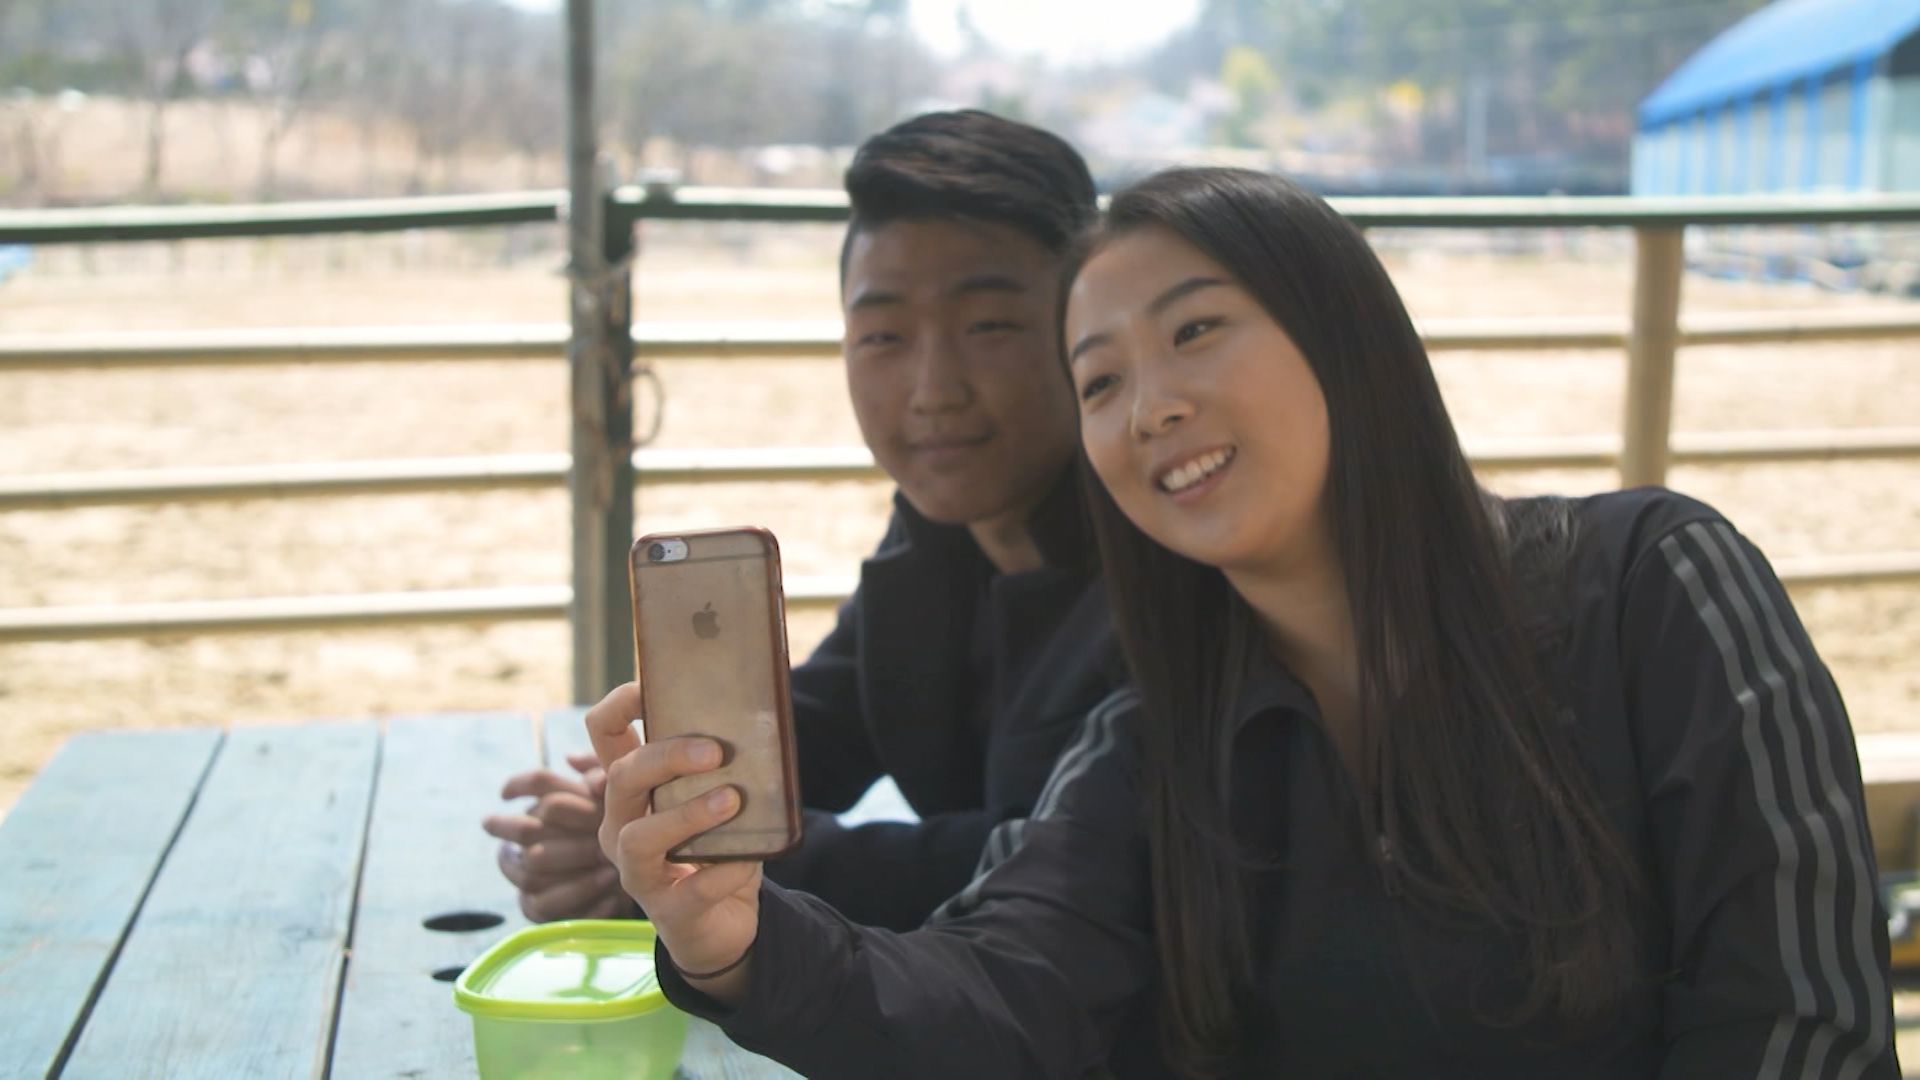 College Girl Ki Chudai Video - Why young South Koreans aren't interested in dating | CNN